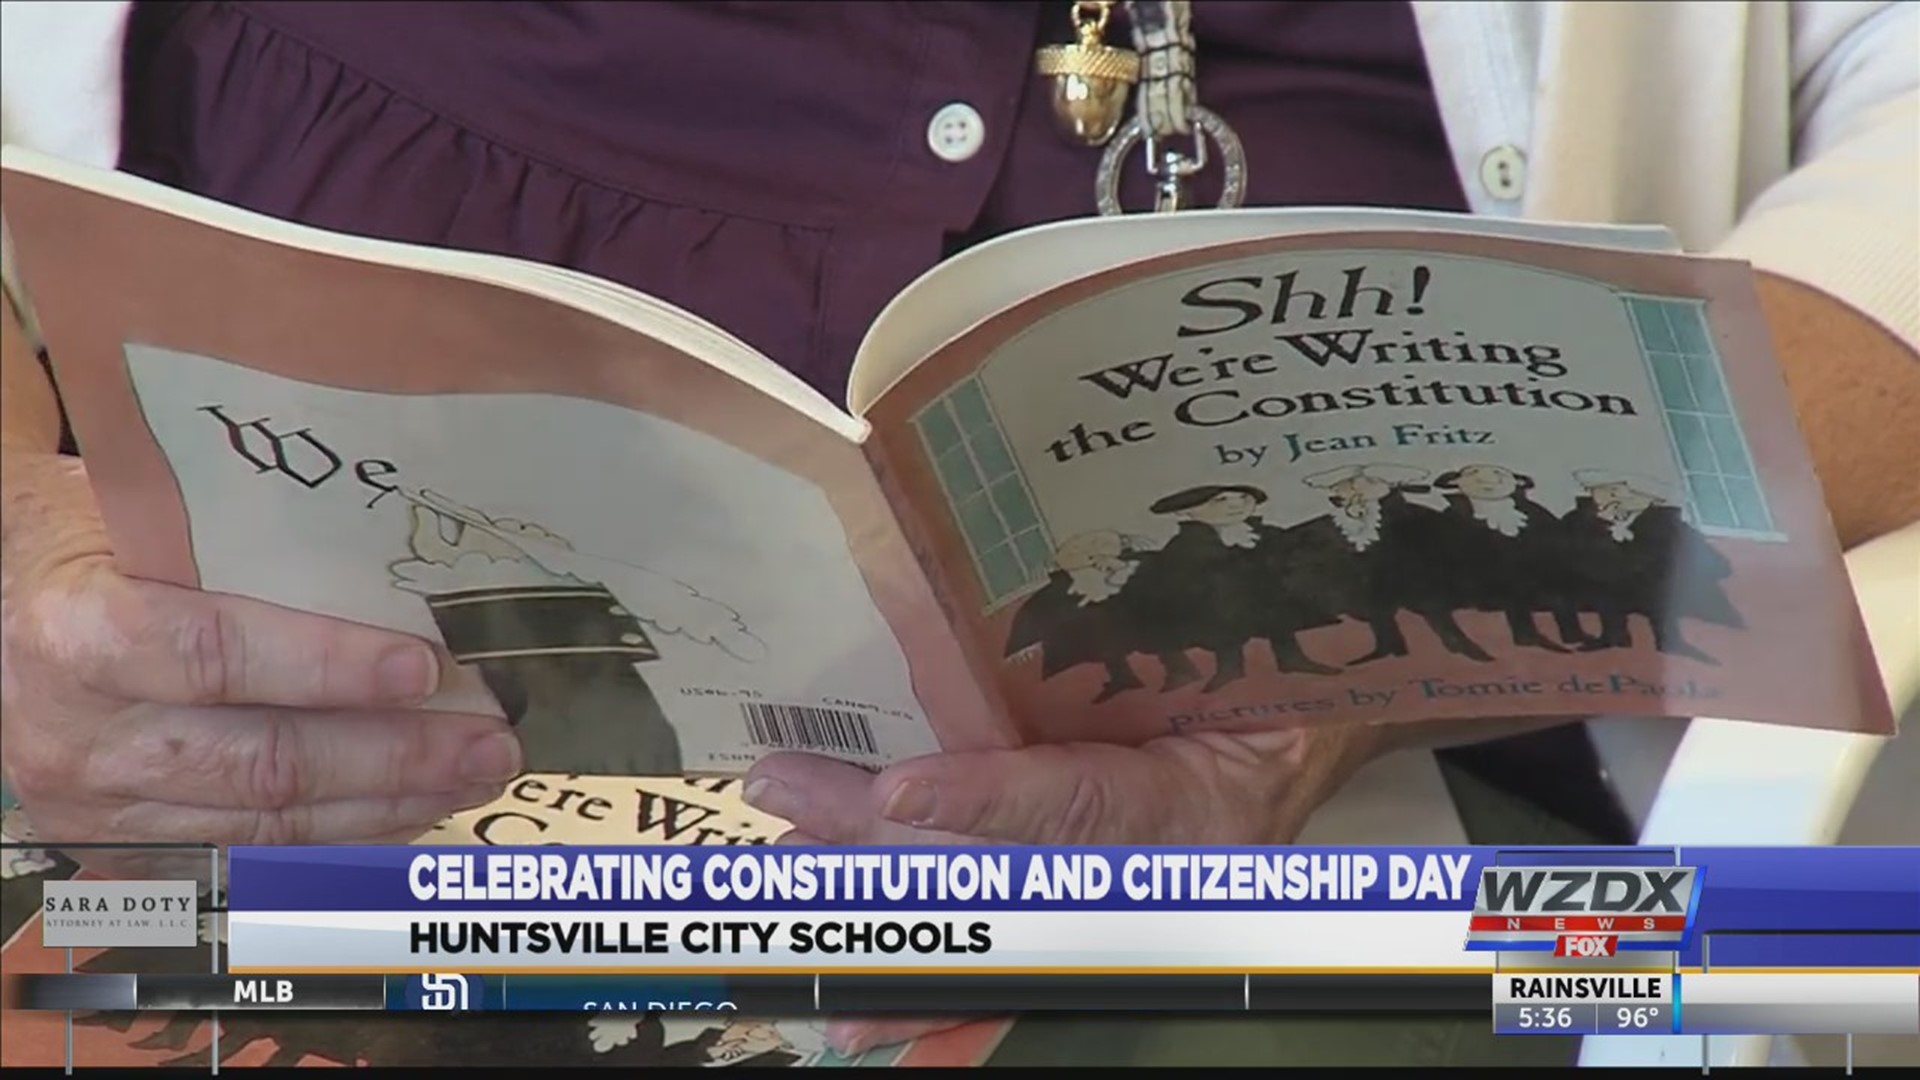 Tuesday kids at Huntsville City Schools celebrated Constitution Day and Citizenship Day.